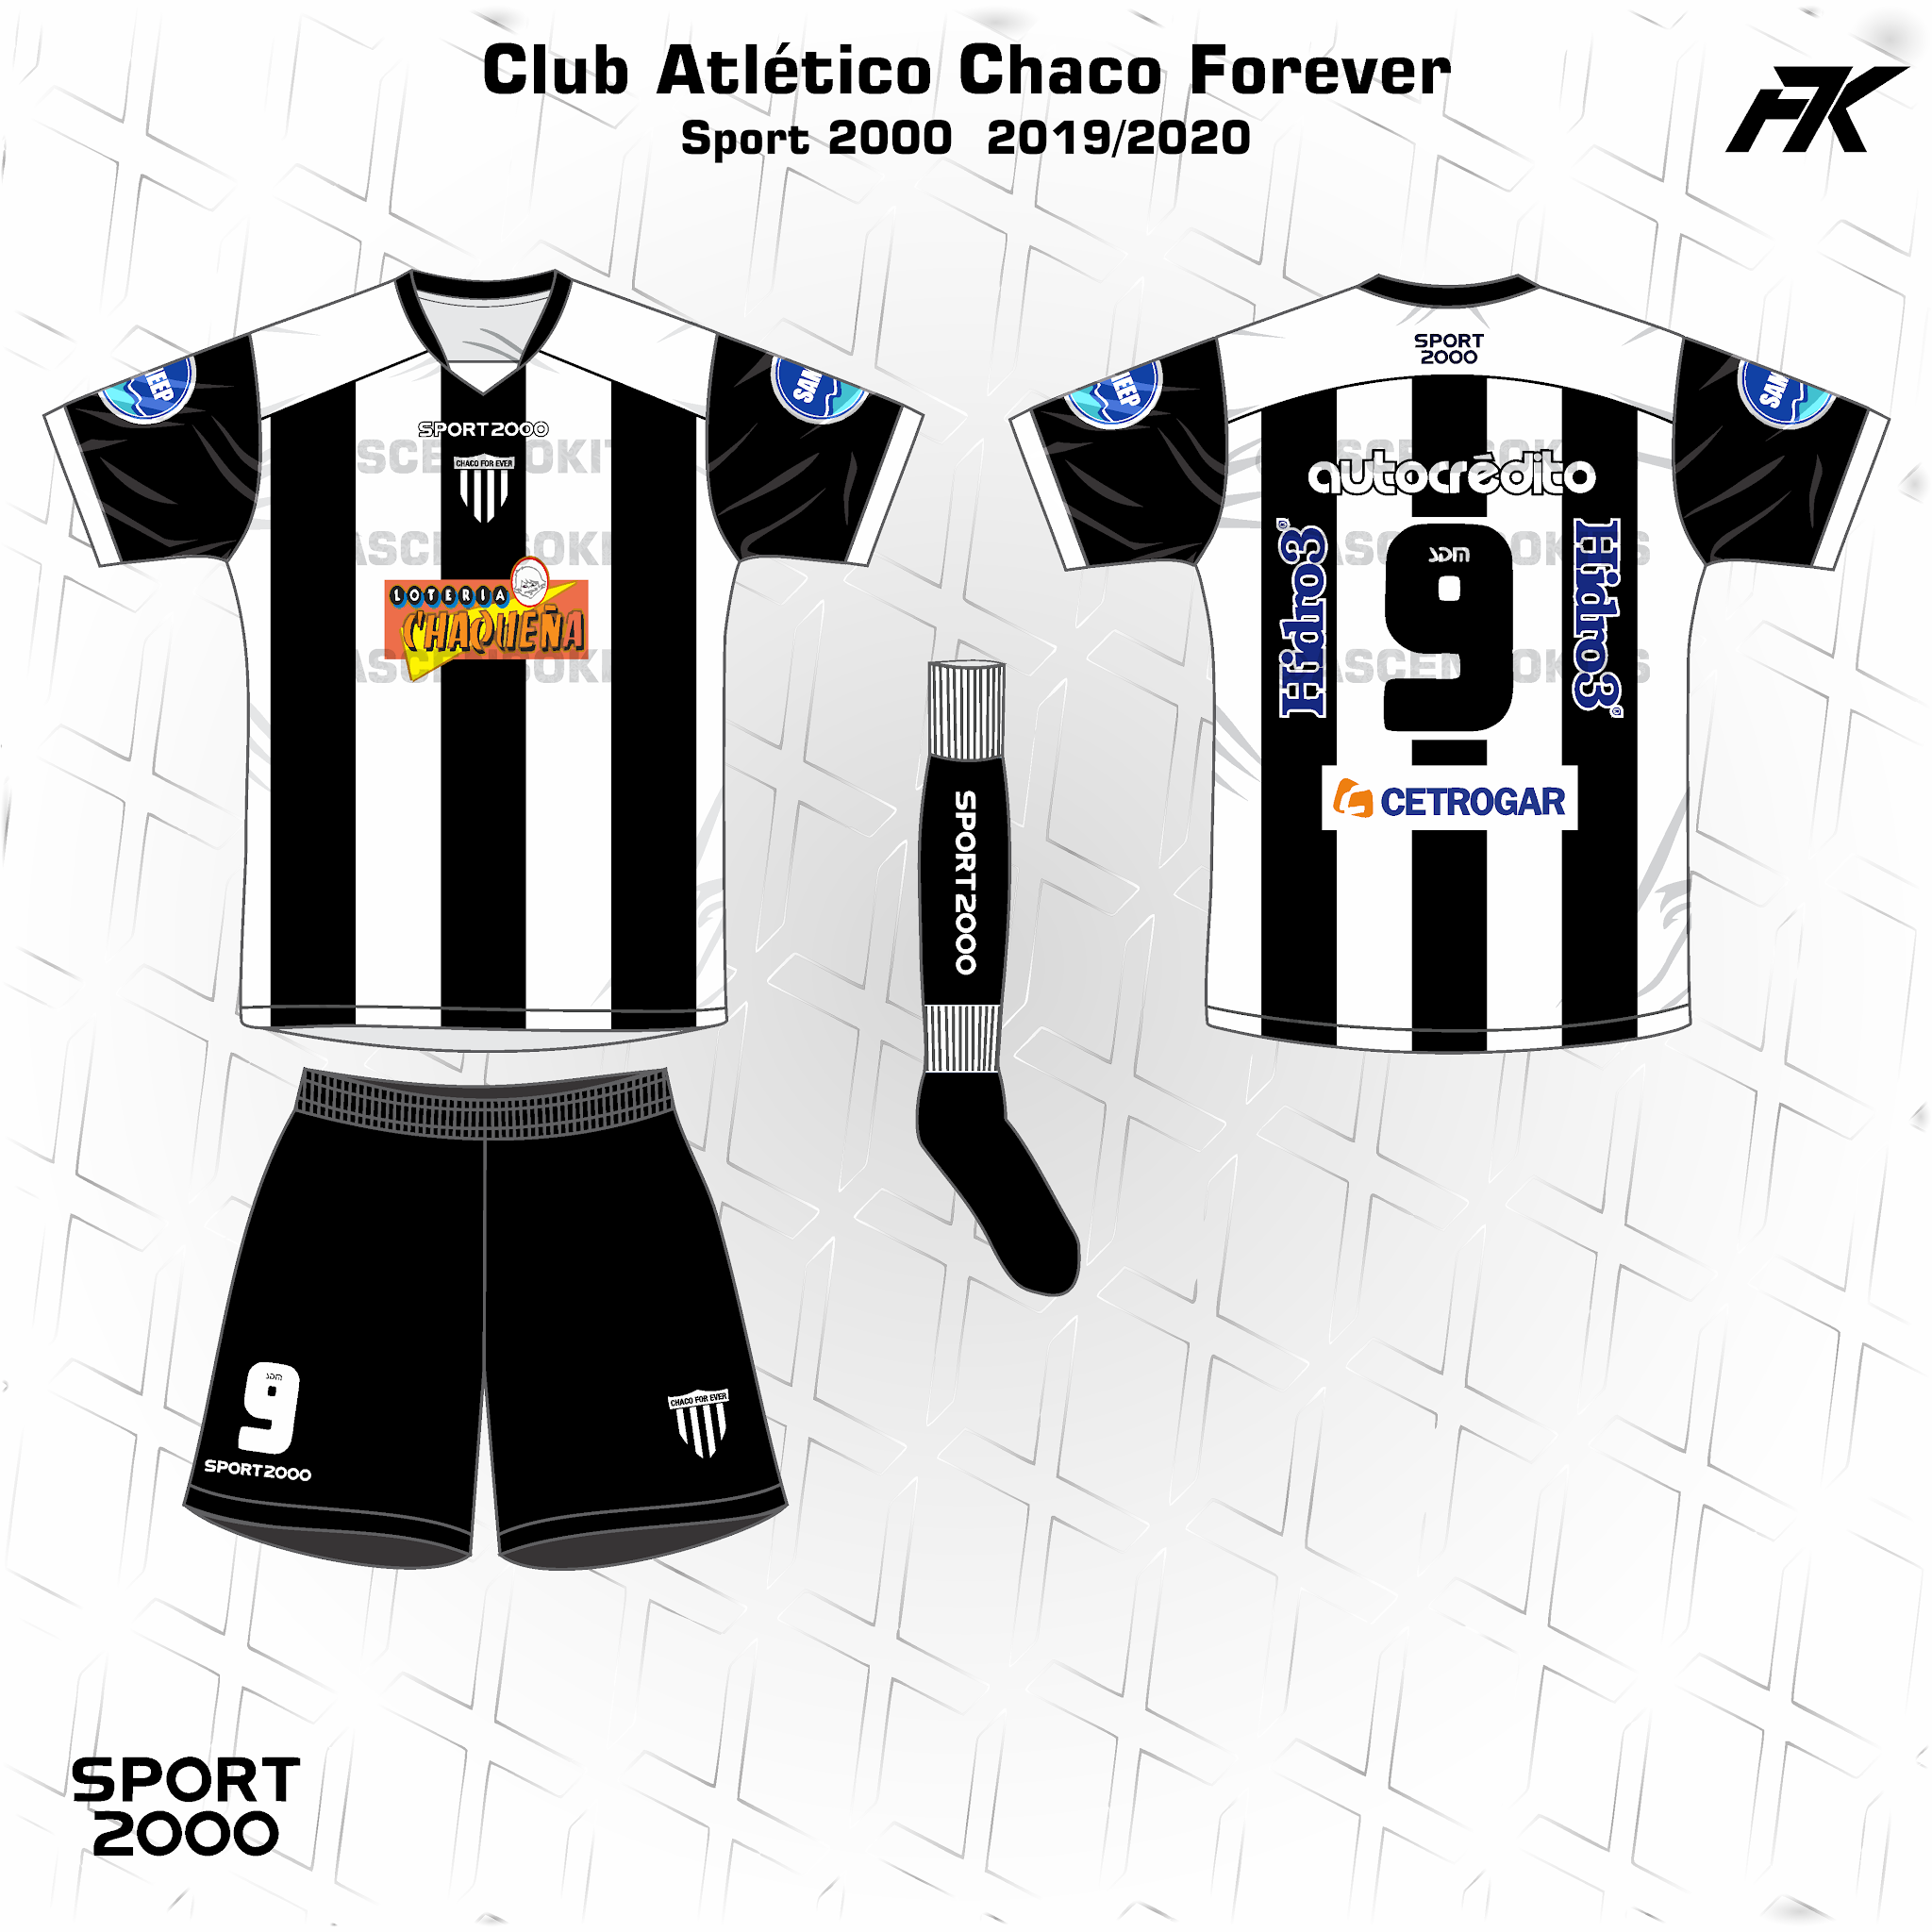 Ascensokits: Chaco Forever Sport 2000 2020